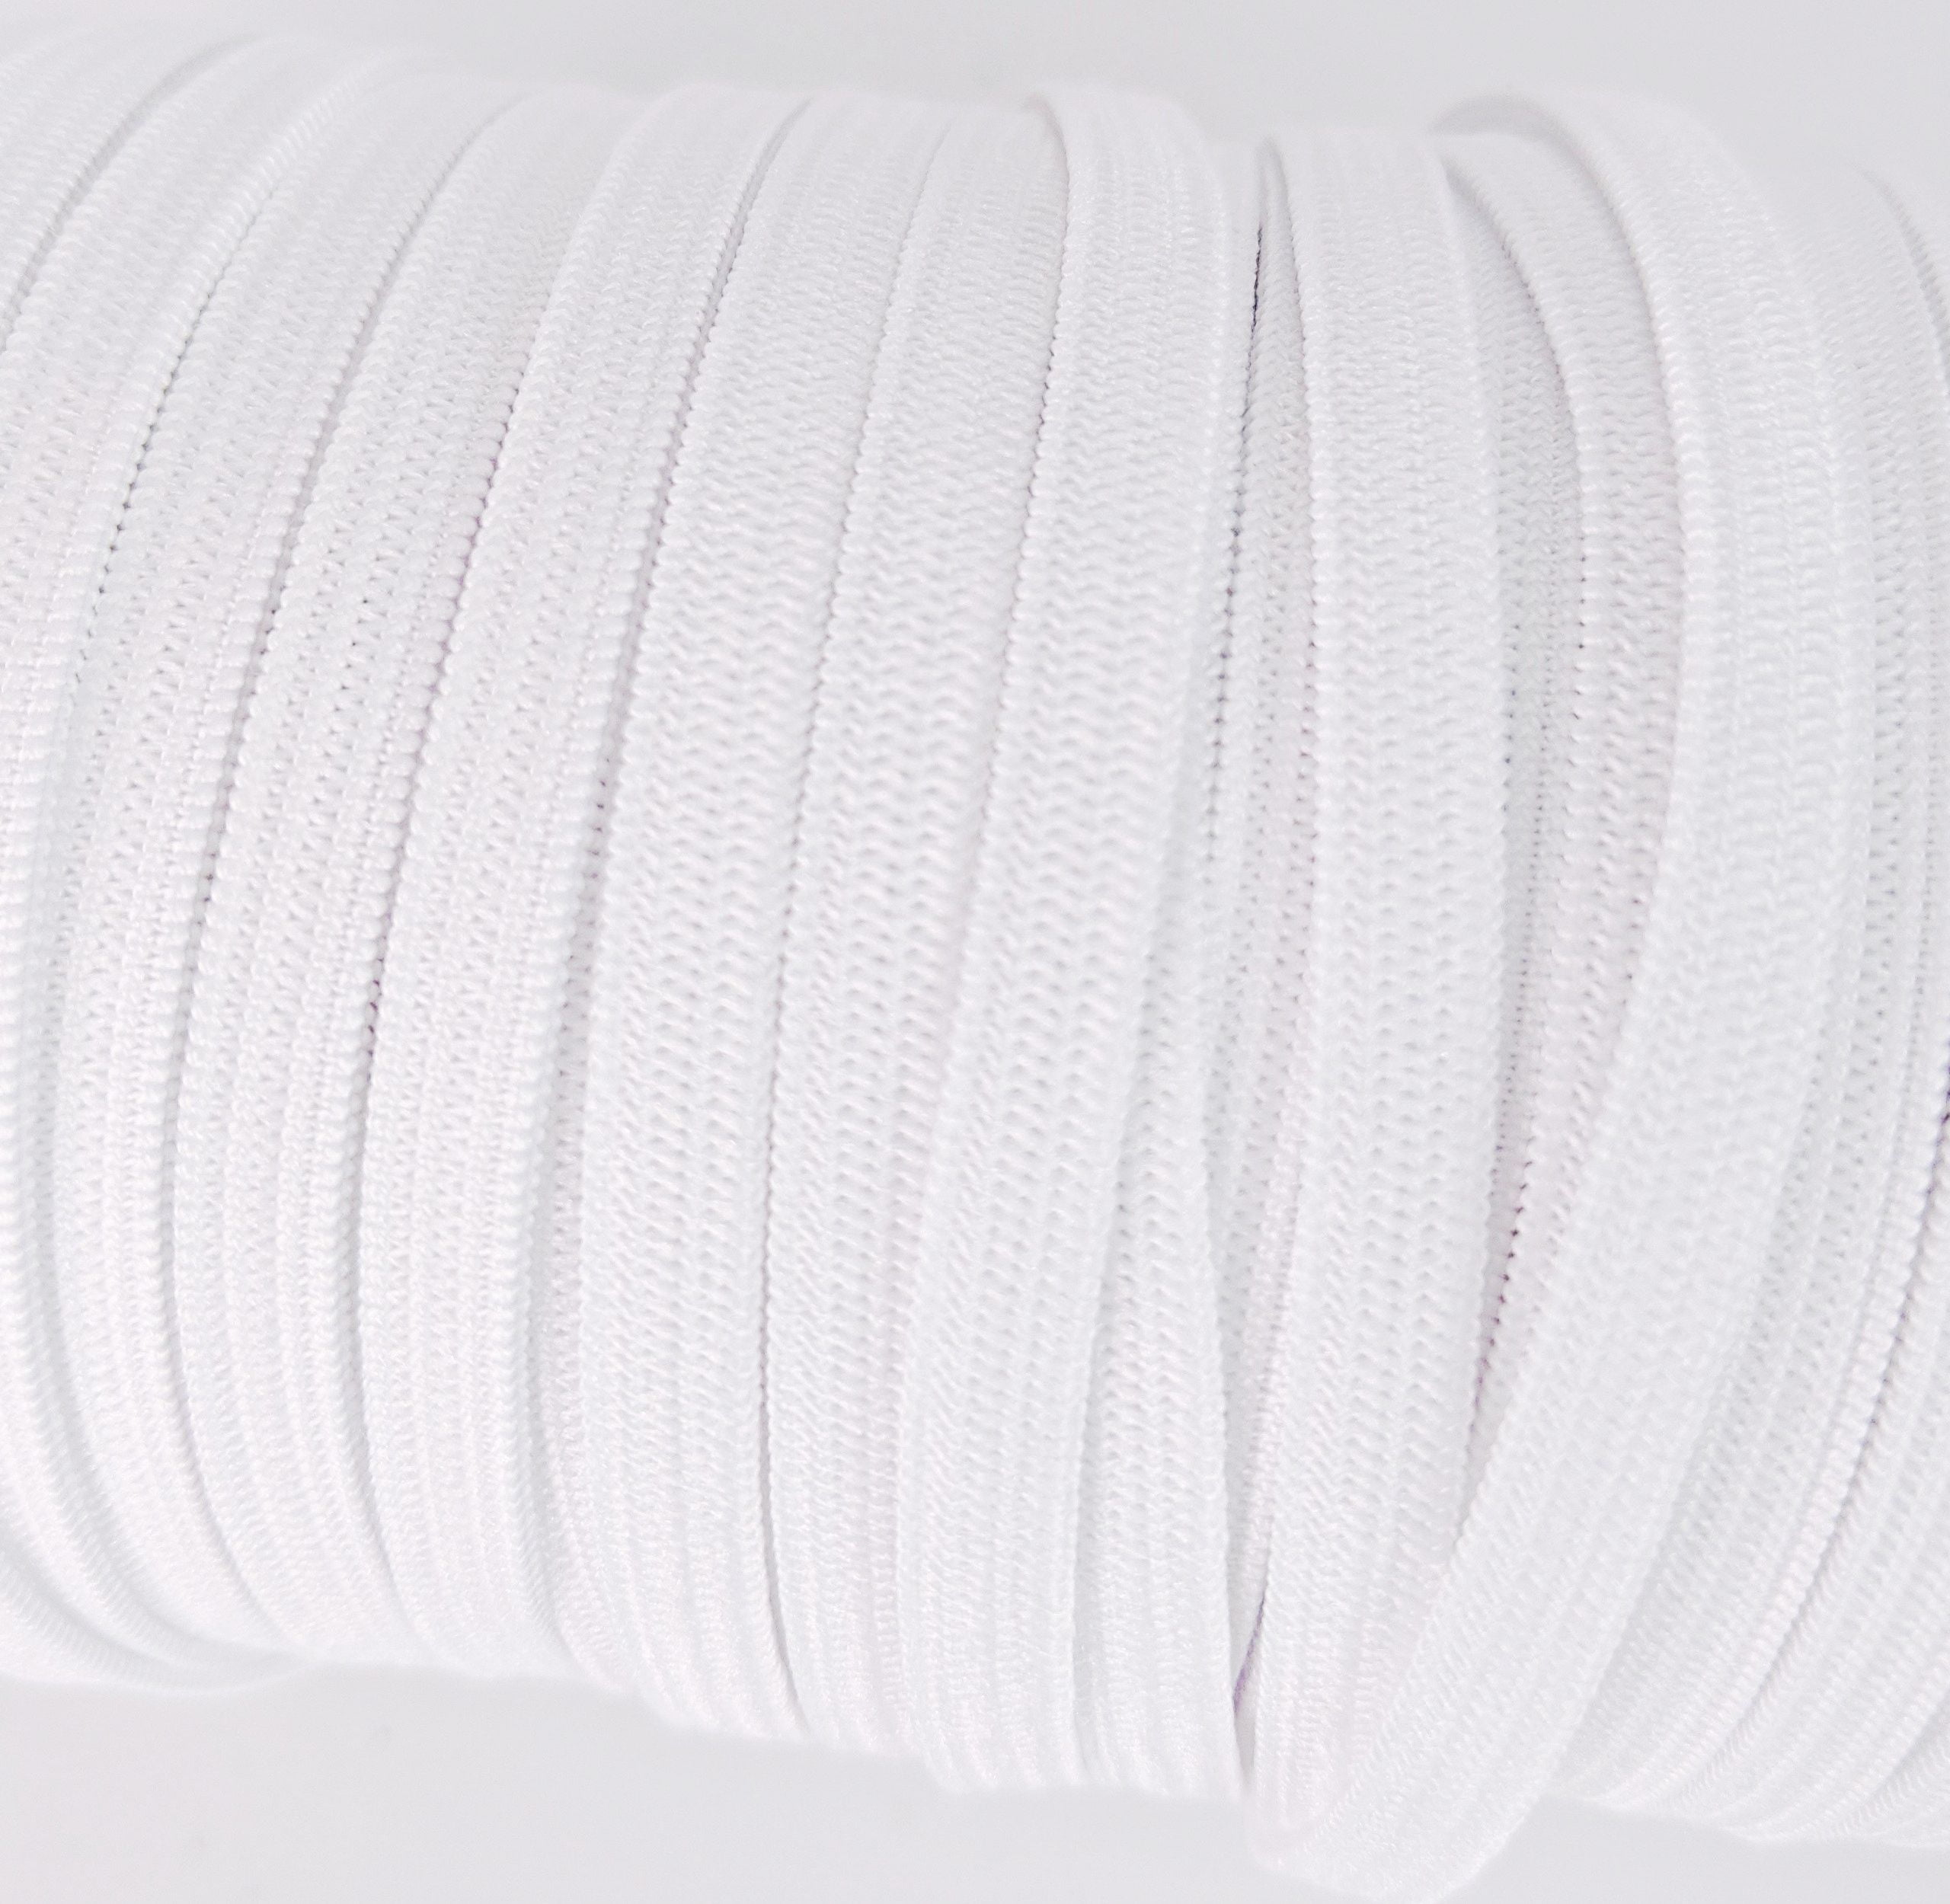 Elastic Cord raided Stretch Strap Cord Roll for Sewing and Crafting Elastic Cord White 1/4 Width 100 Yards Length Elastic Sewing Elastic Band for Knit Sewing Crafts